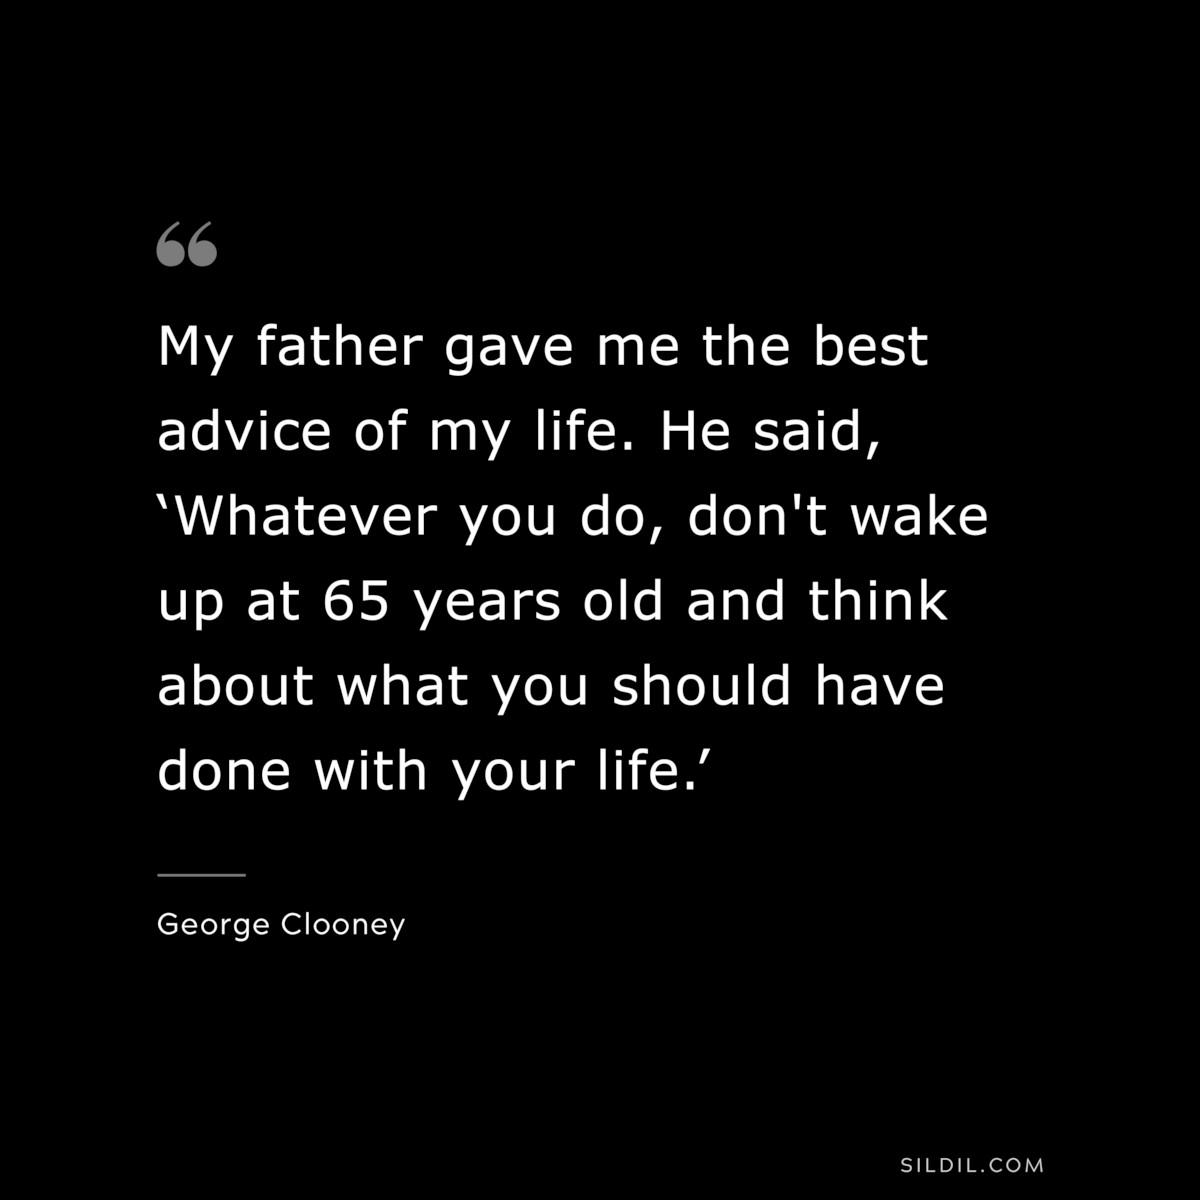 My father gave me the best advice of my life. He said, ‘Whatever you do, don't wake up at 65 years old and think about what you should have done with your life.’ ― George Clooney